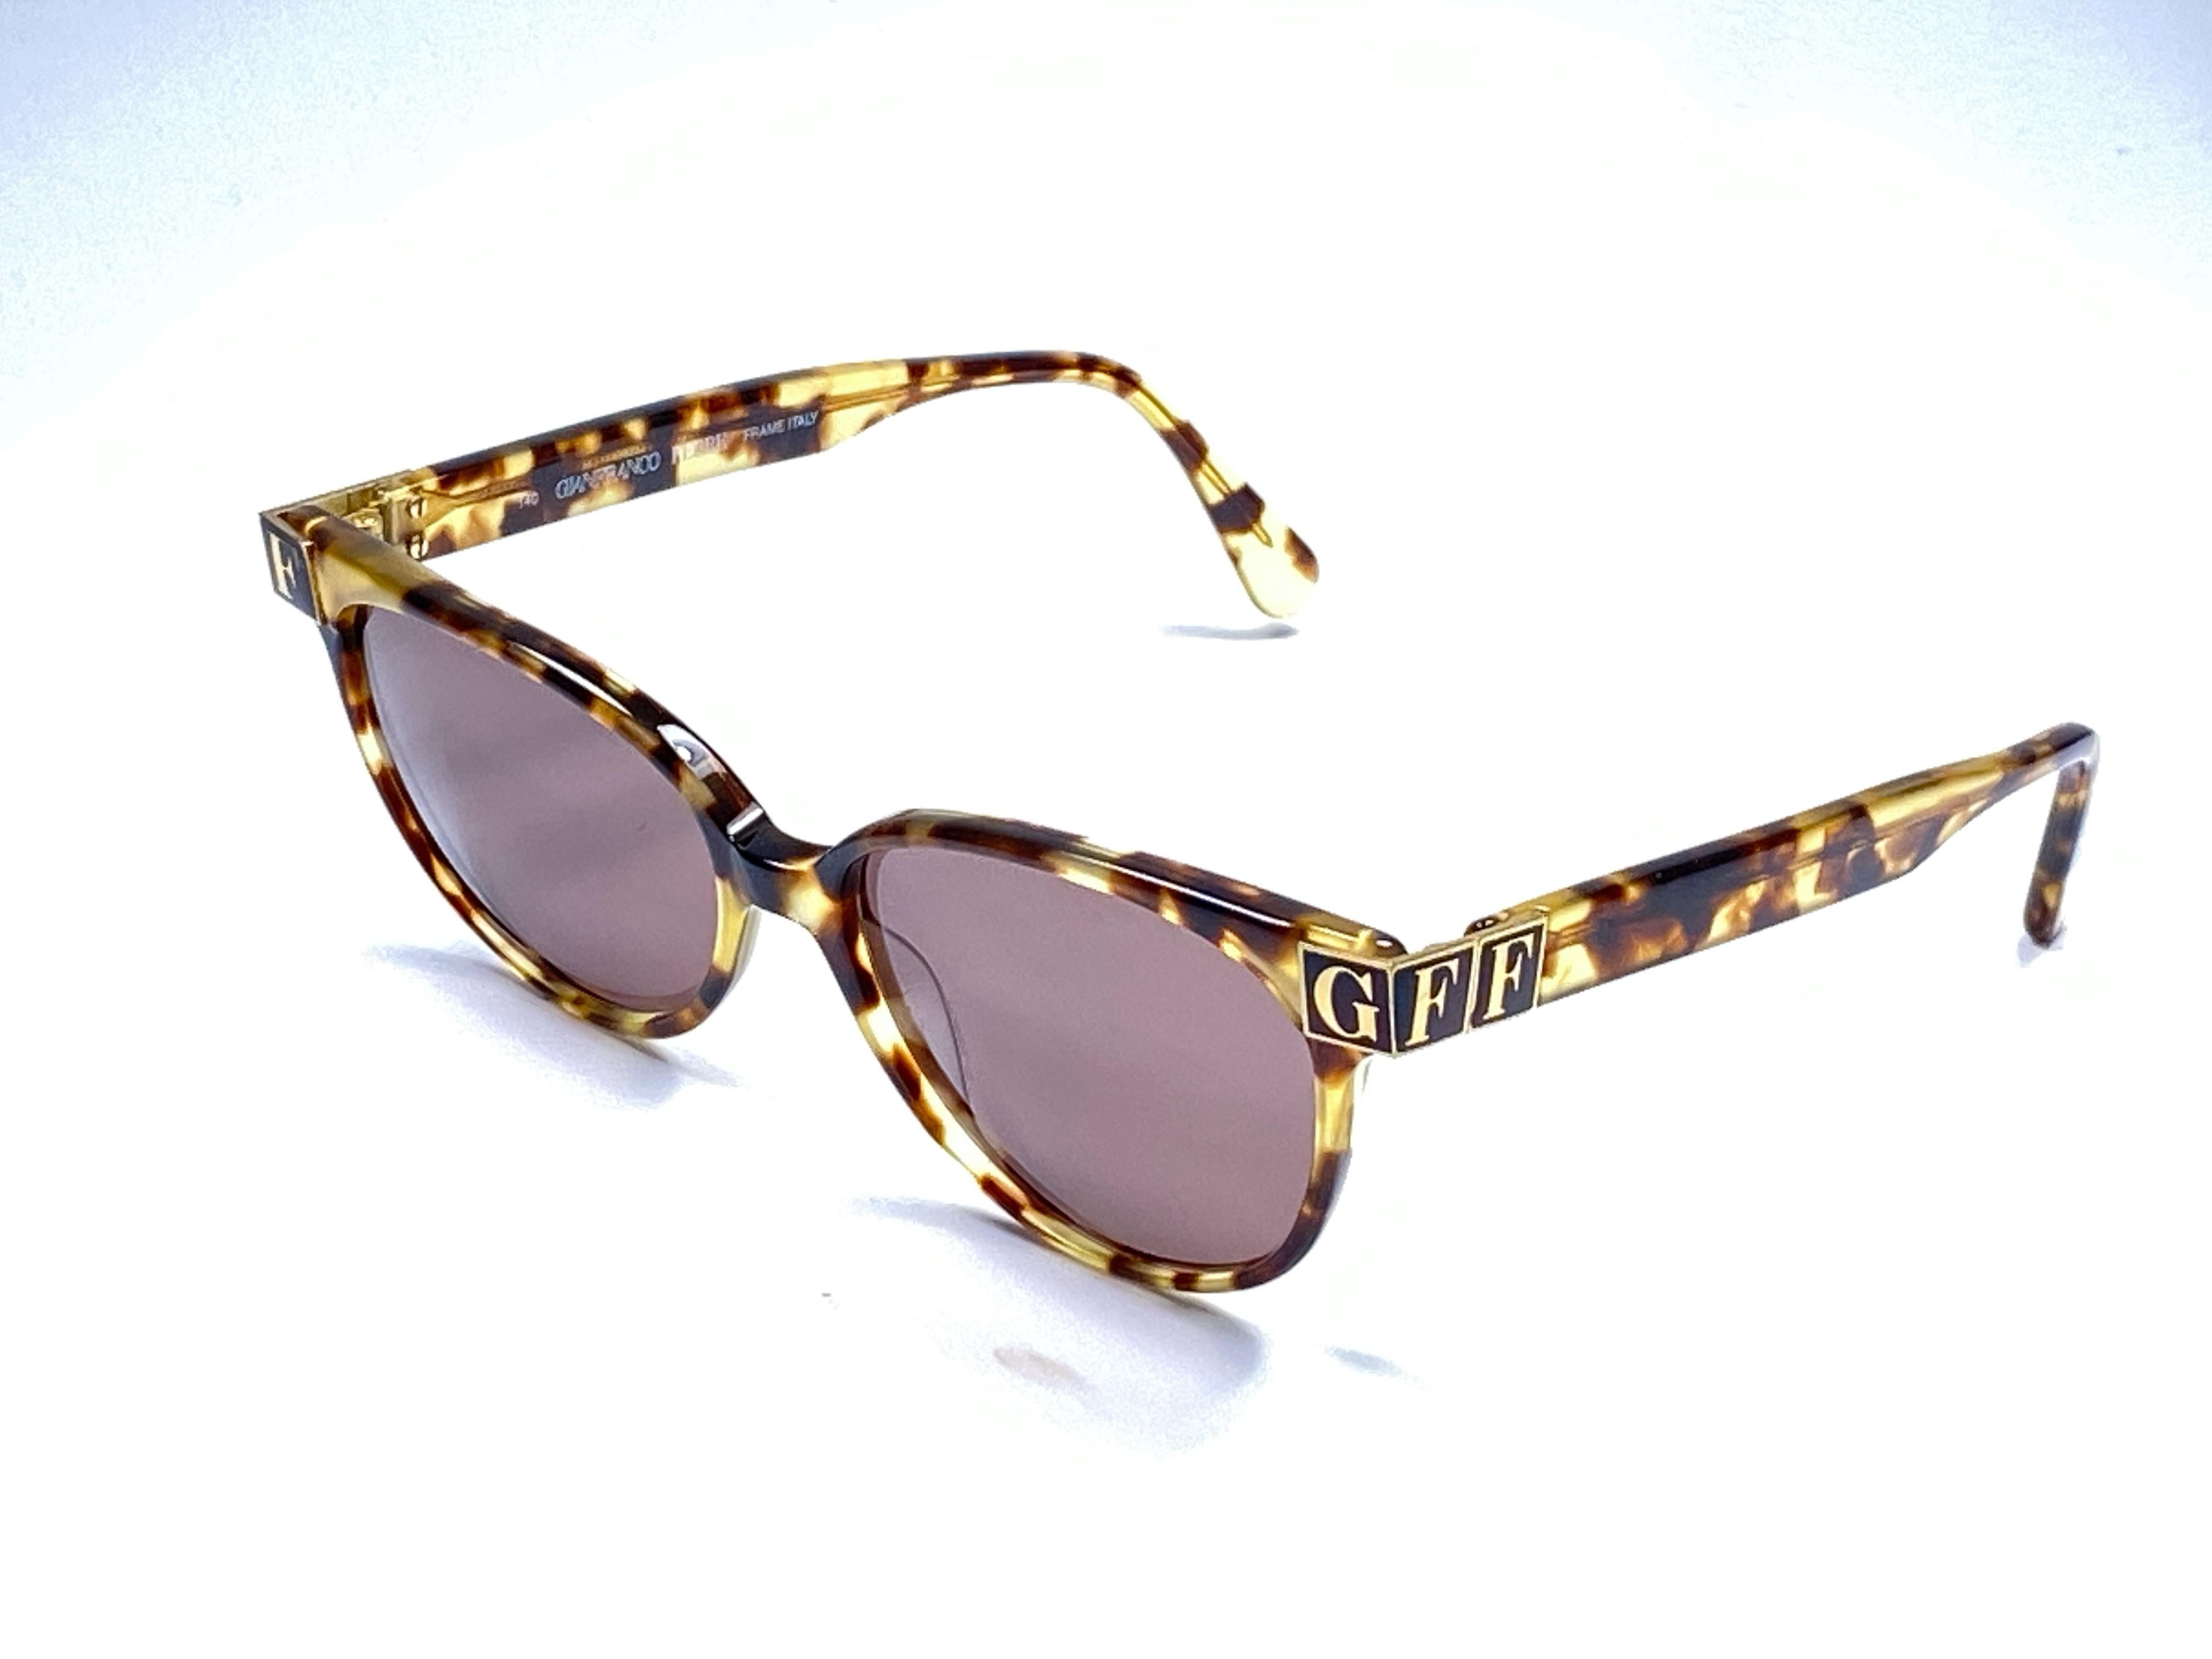 New Vintage Gianfranco Ferré GFF 105 Gold / Tortoise 1990 Italy Sunglasses In New Condition For Sale In Baleares, Baleares